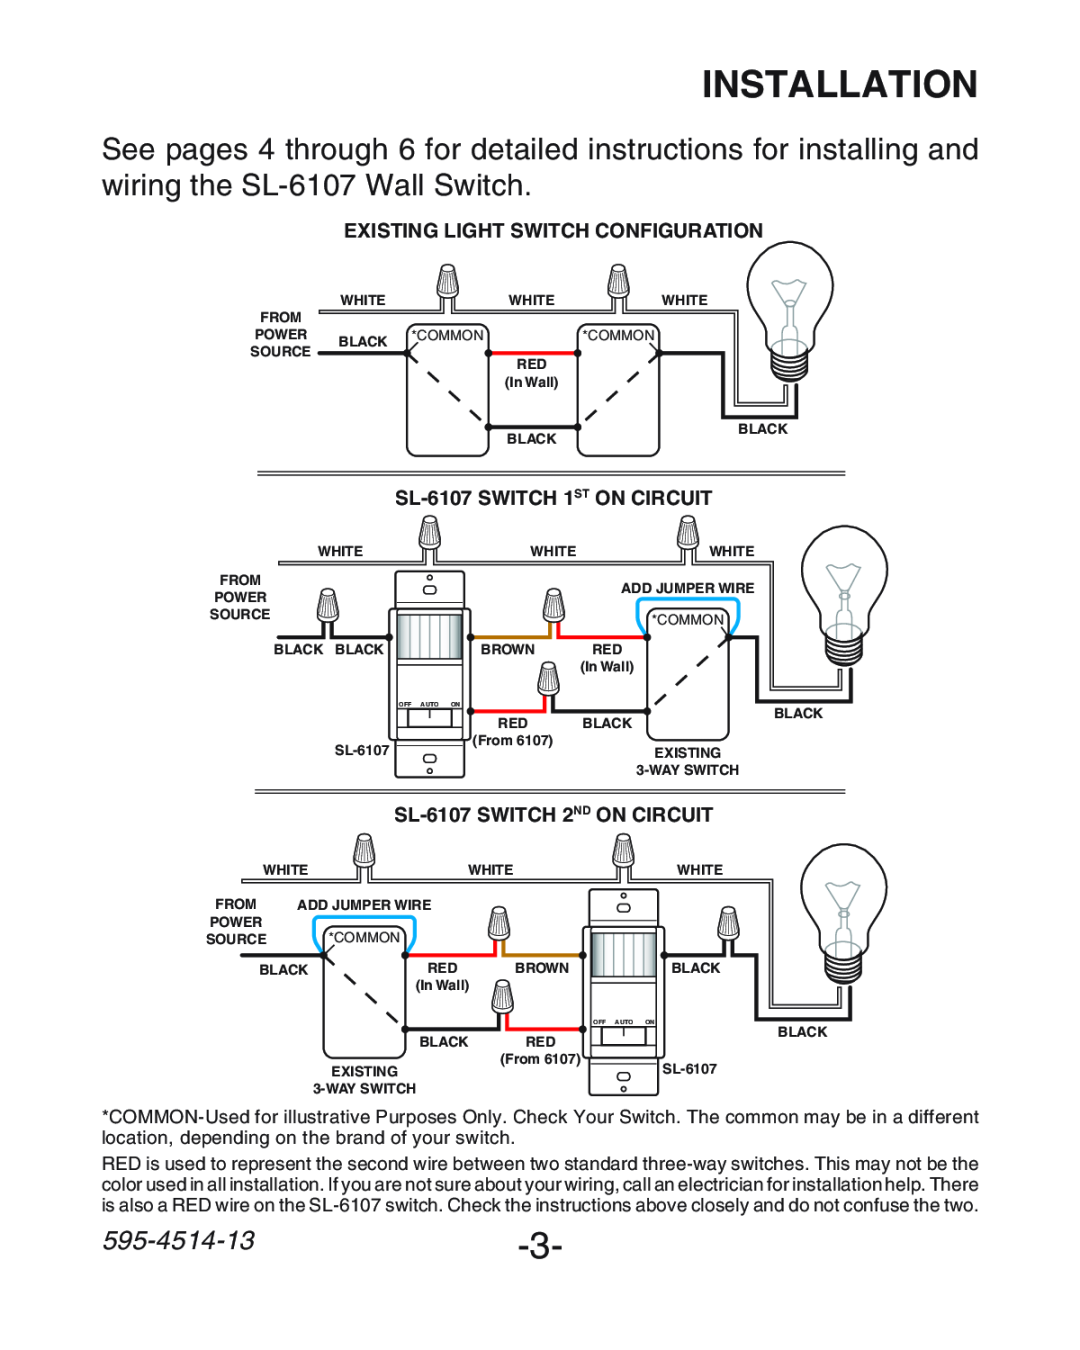 Heath Zenith manual Installation, 595-4514-13-3, Existing Light Switch Configuration, SL-6107SWITCH 1ST ON CIRCUIT 